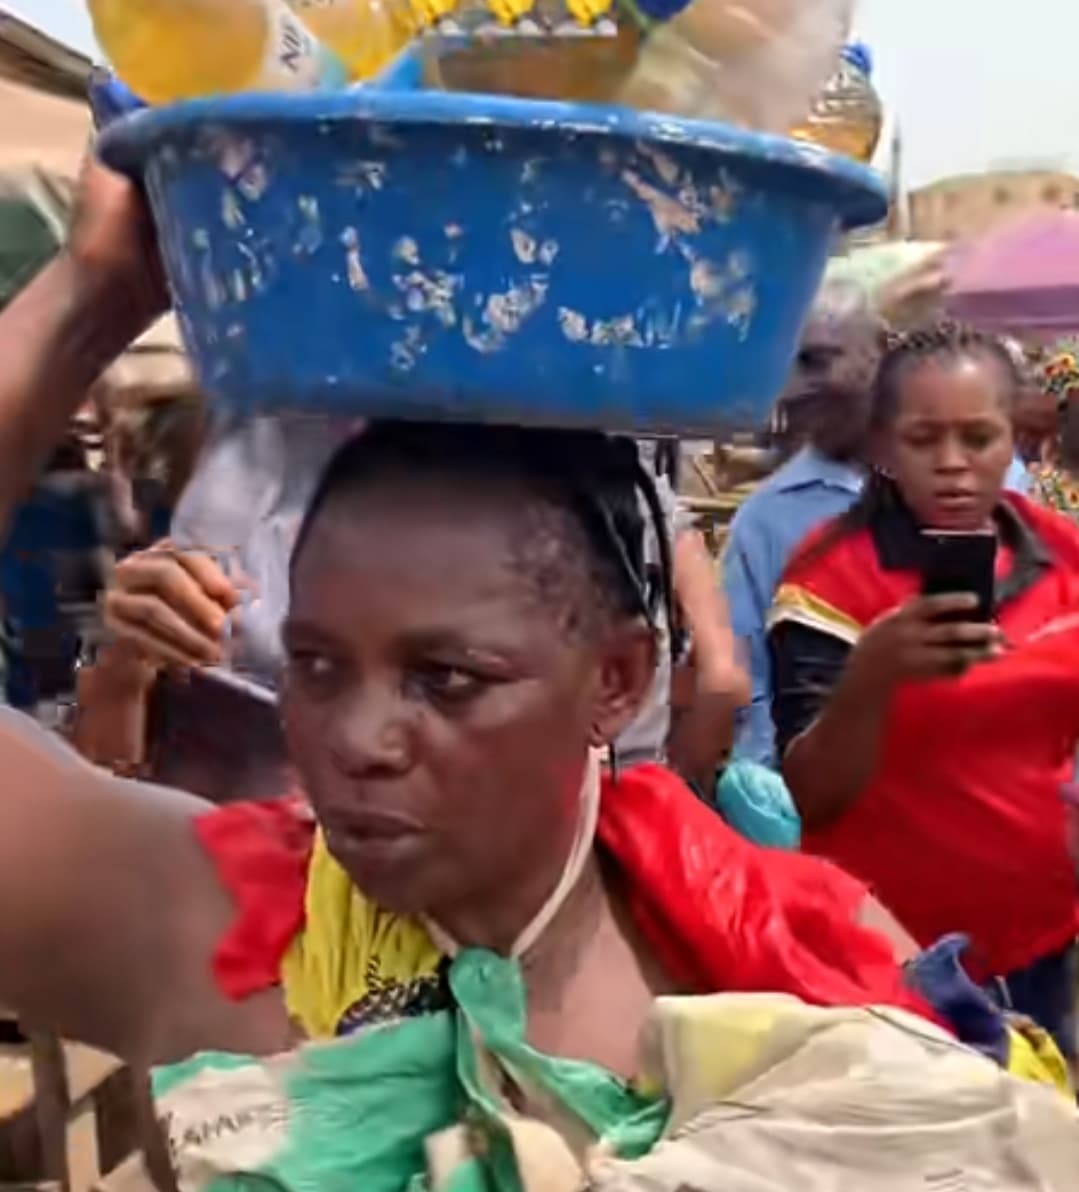 "She stole what's on her head" - Elderly woman caught stealing cooking oil faces public humiliation in market square